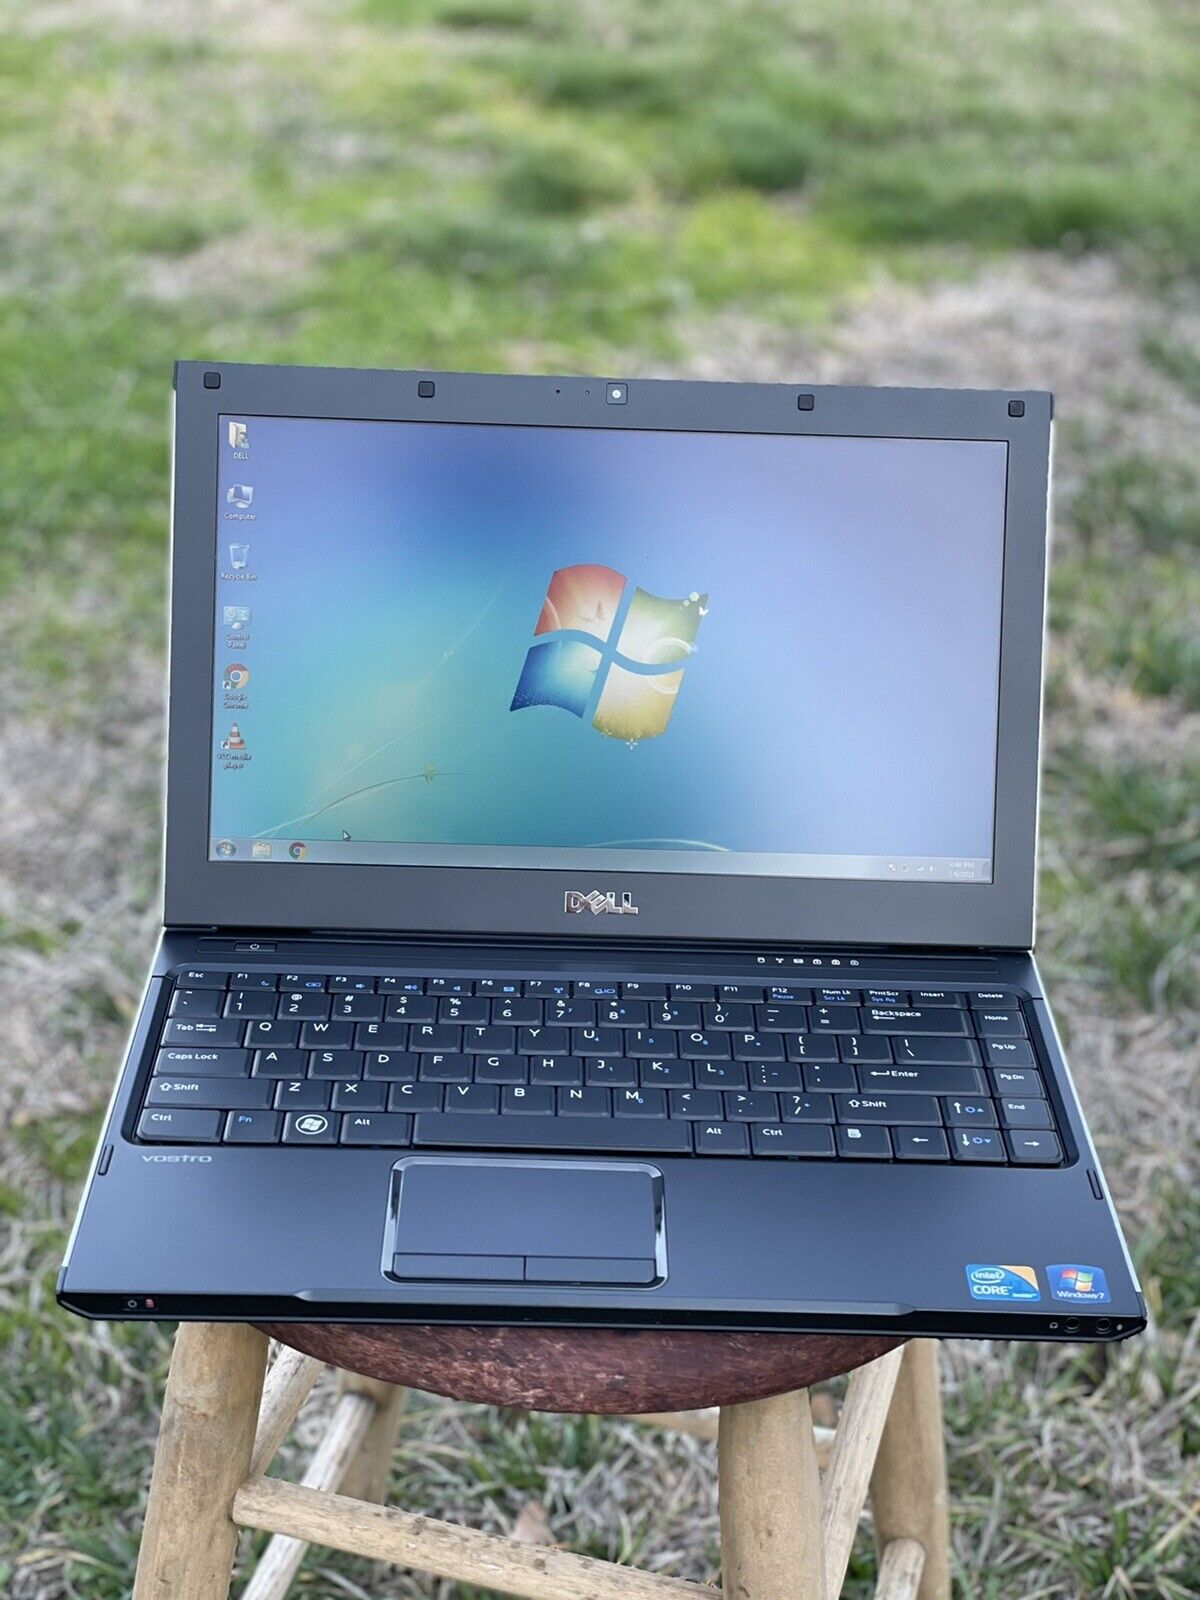 Dell Vostro Laptop With Microsoft Office | Windows 7 Pro | Webcam | 320 GB HDD